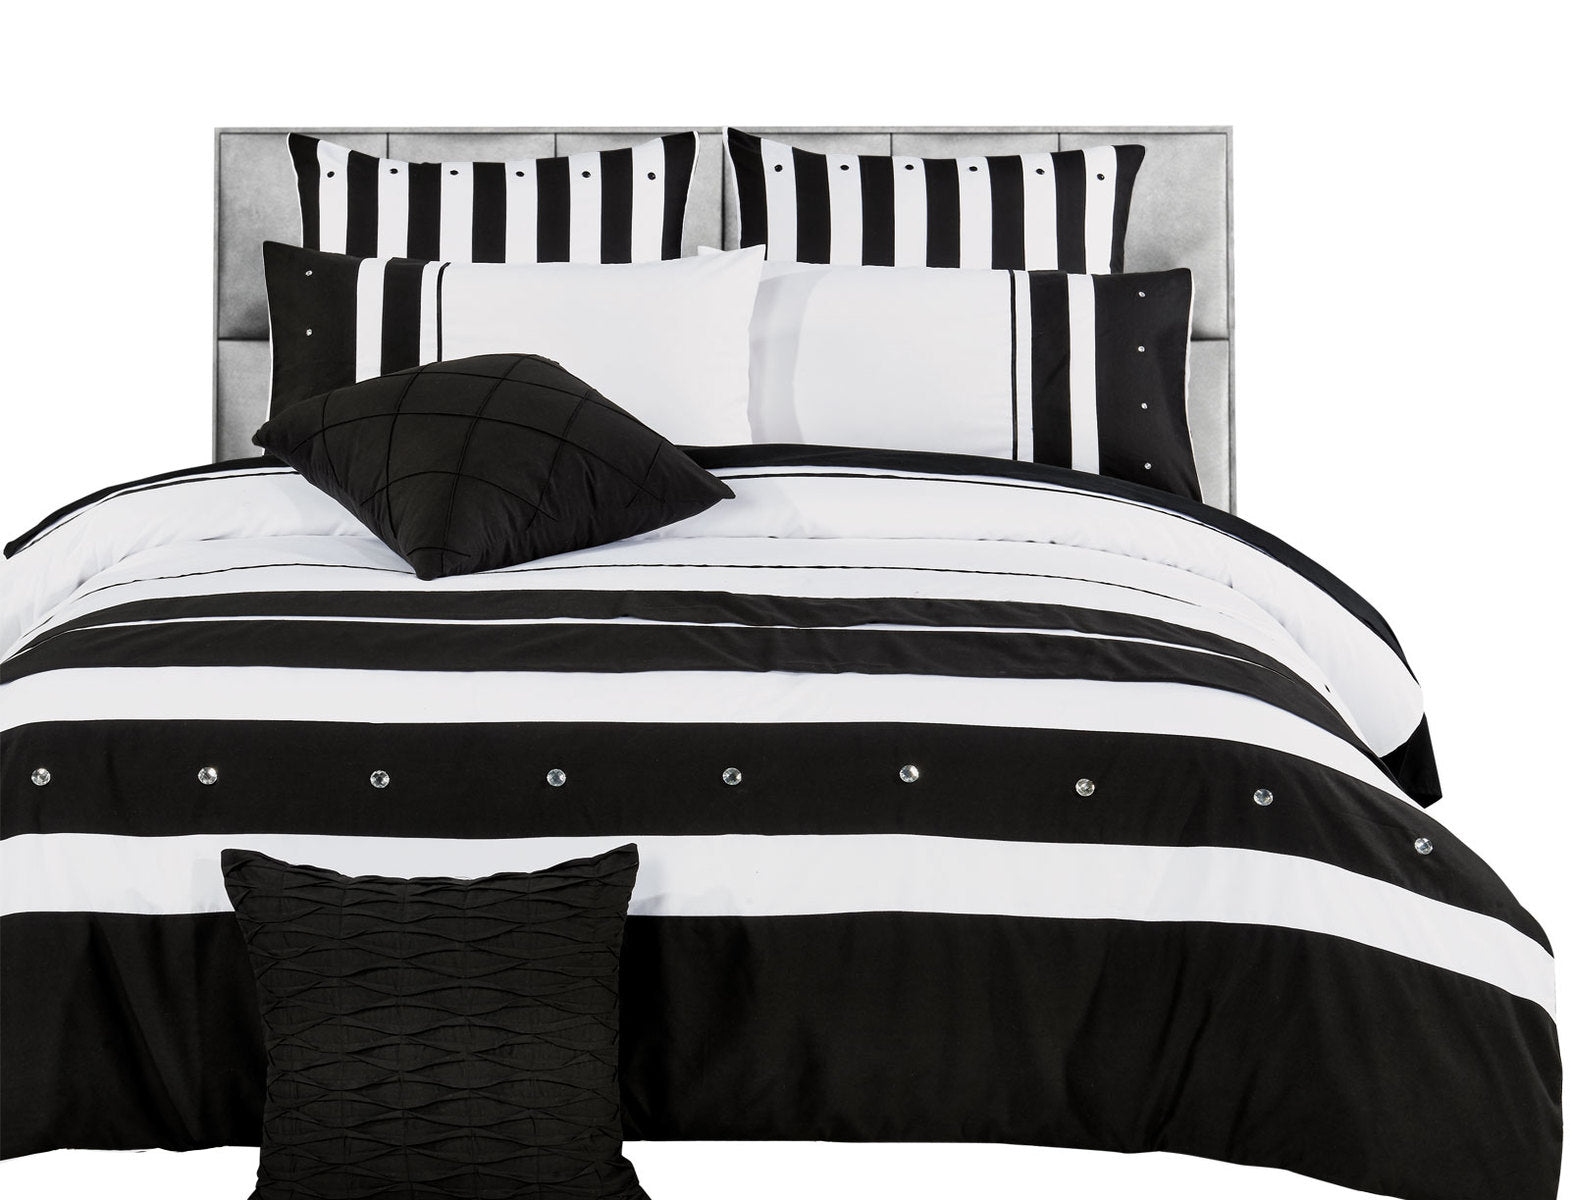 Rezzo Black White Quilt Cover Set in King or Queen or Super king Size Option